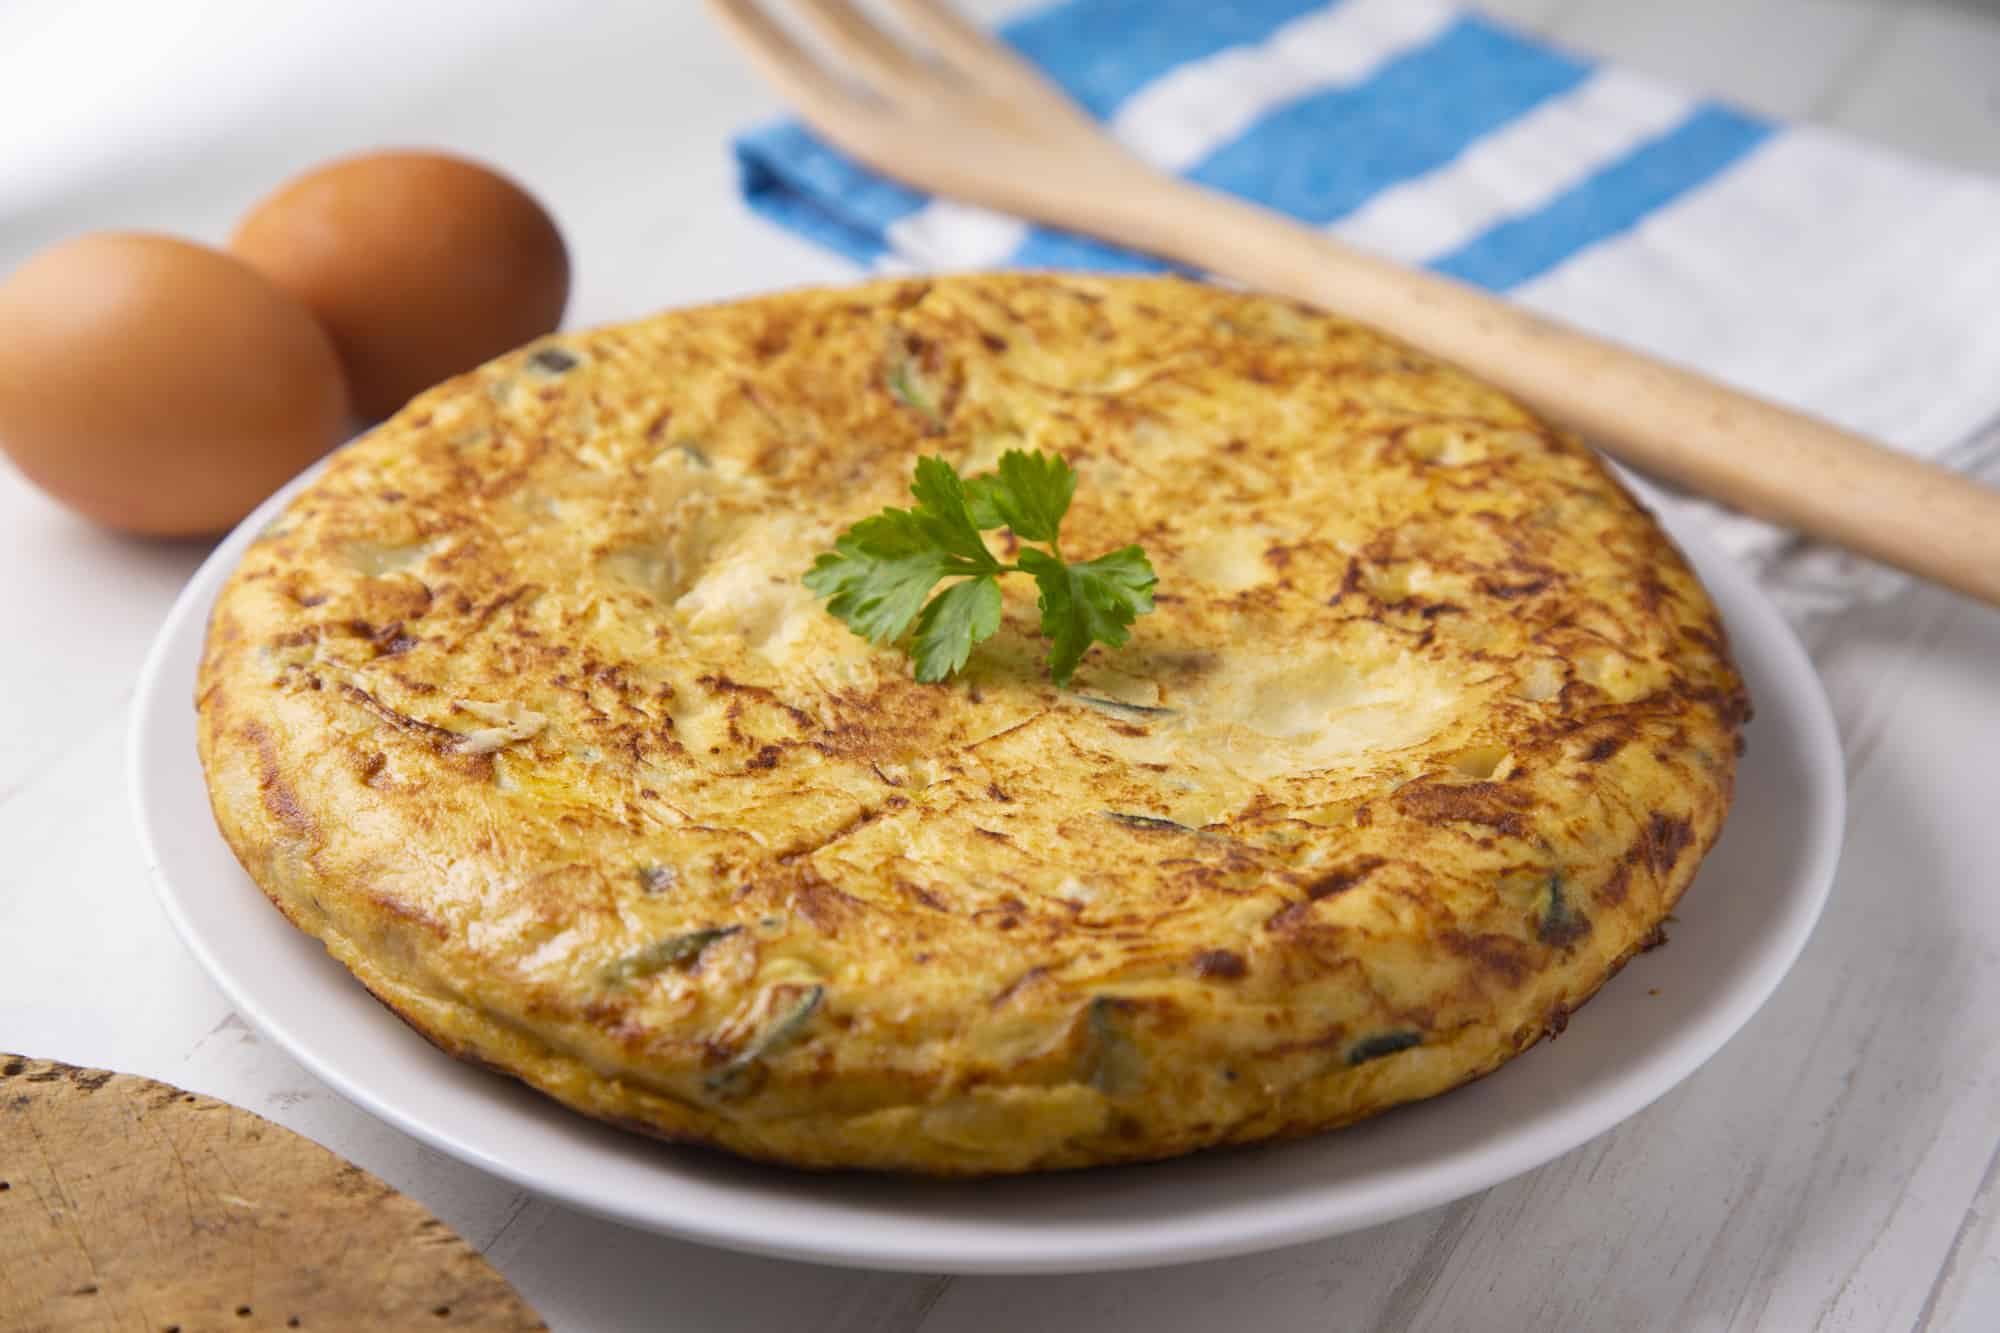 Spanish omelette, known as tortilla